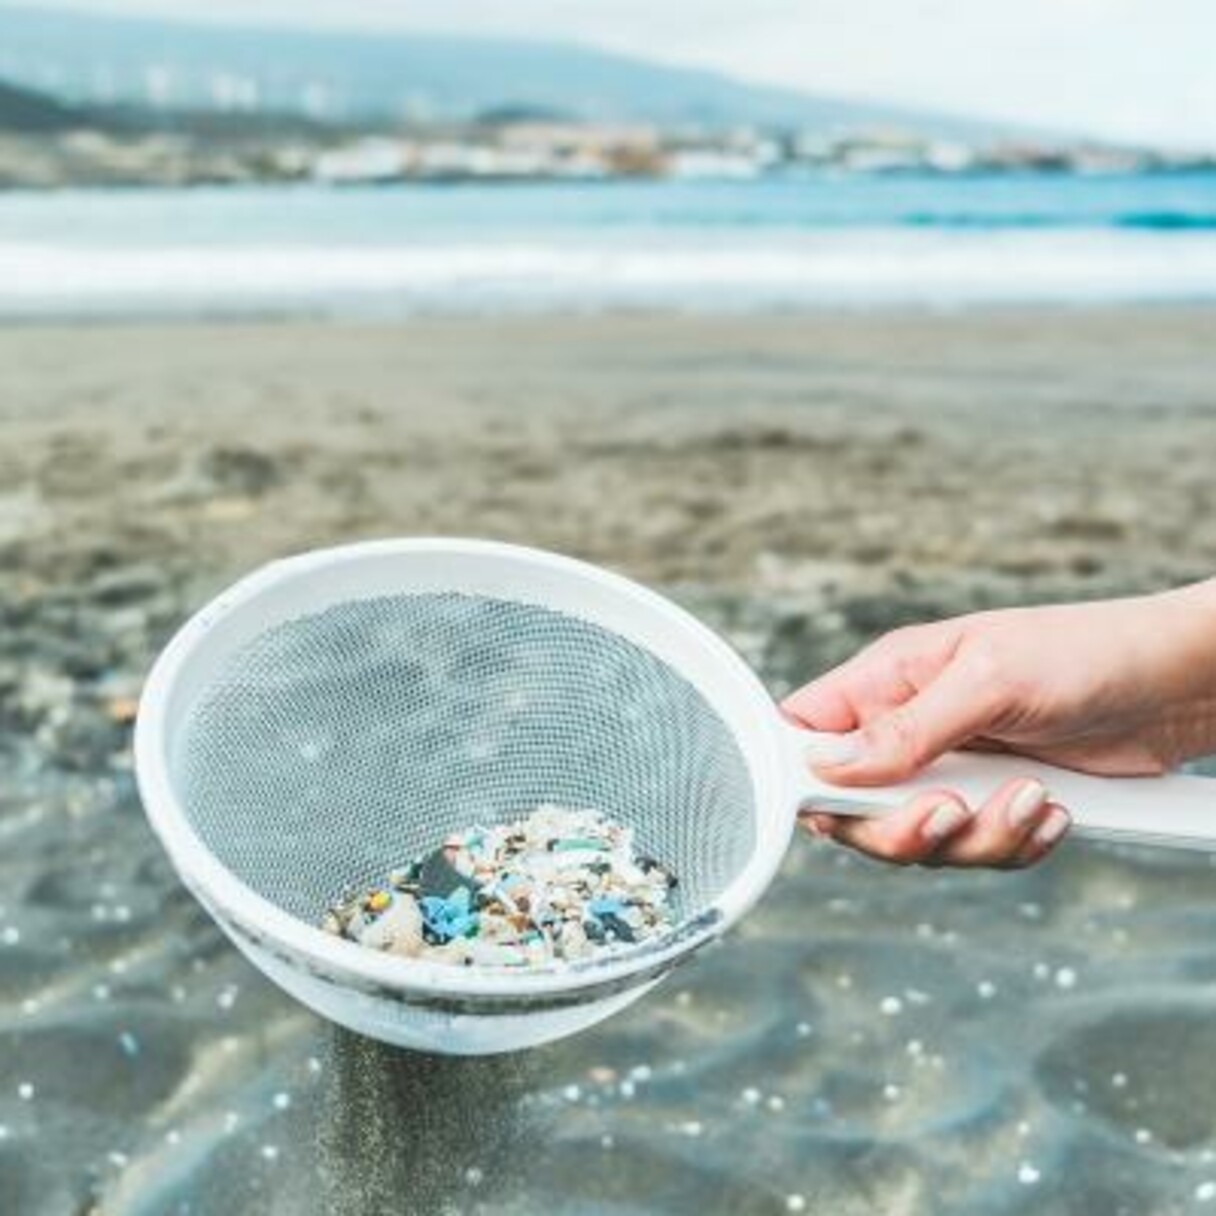 Microplastics are everywhere in water, soil and air